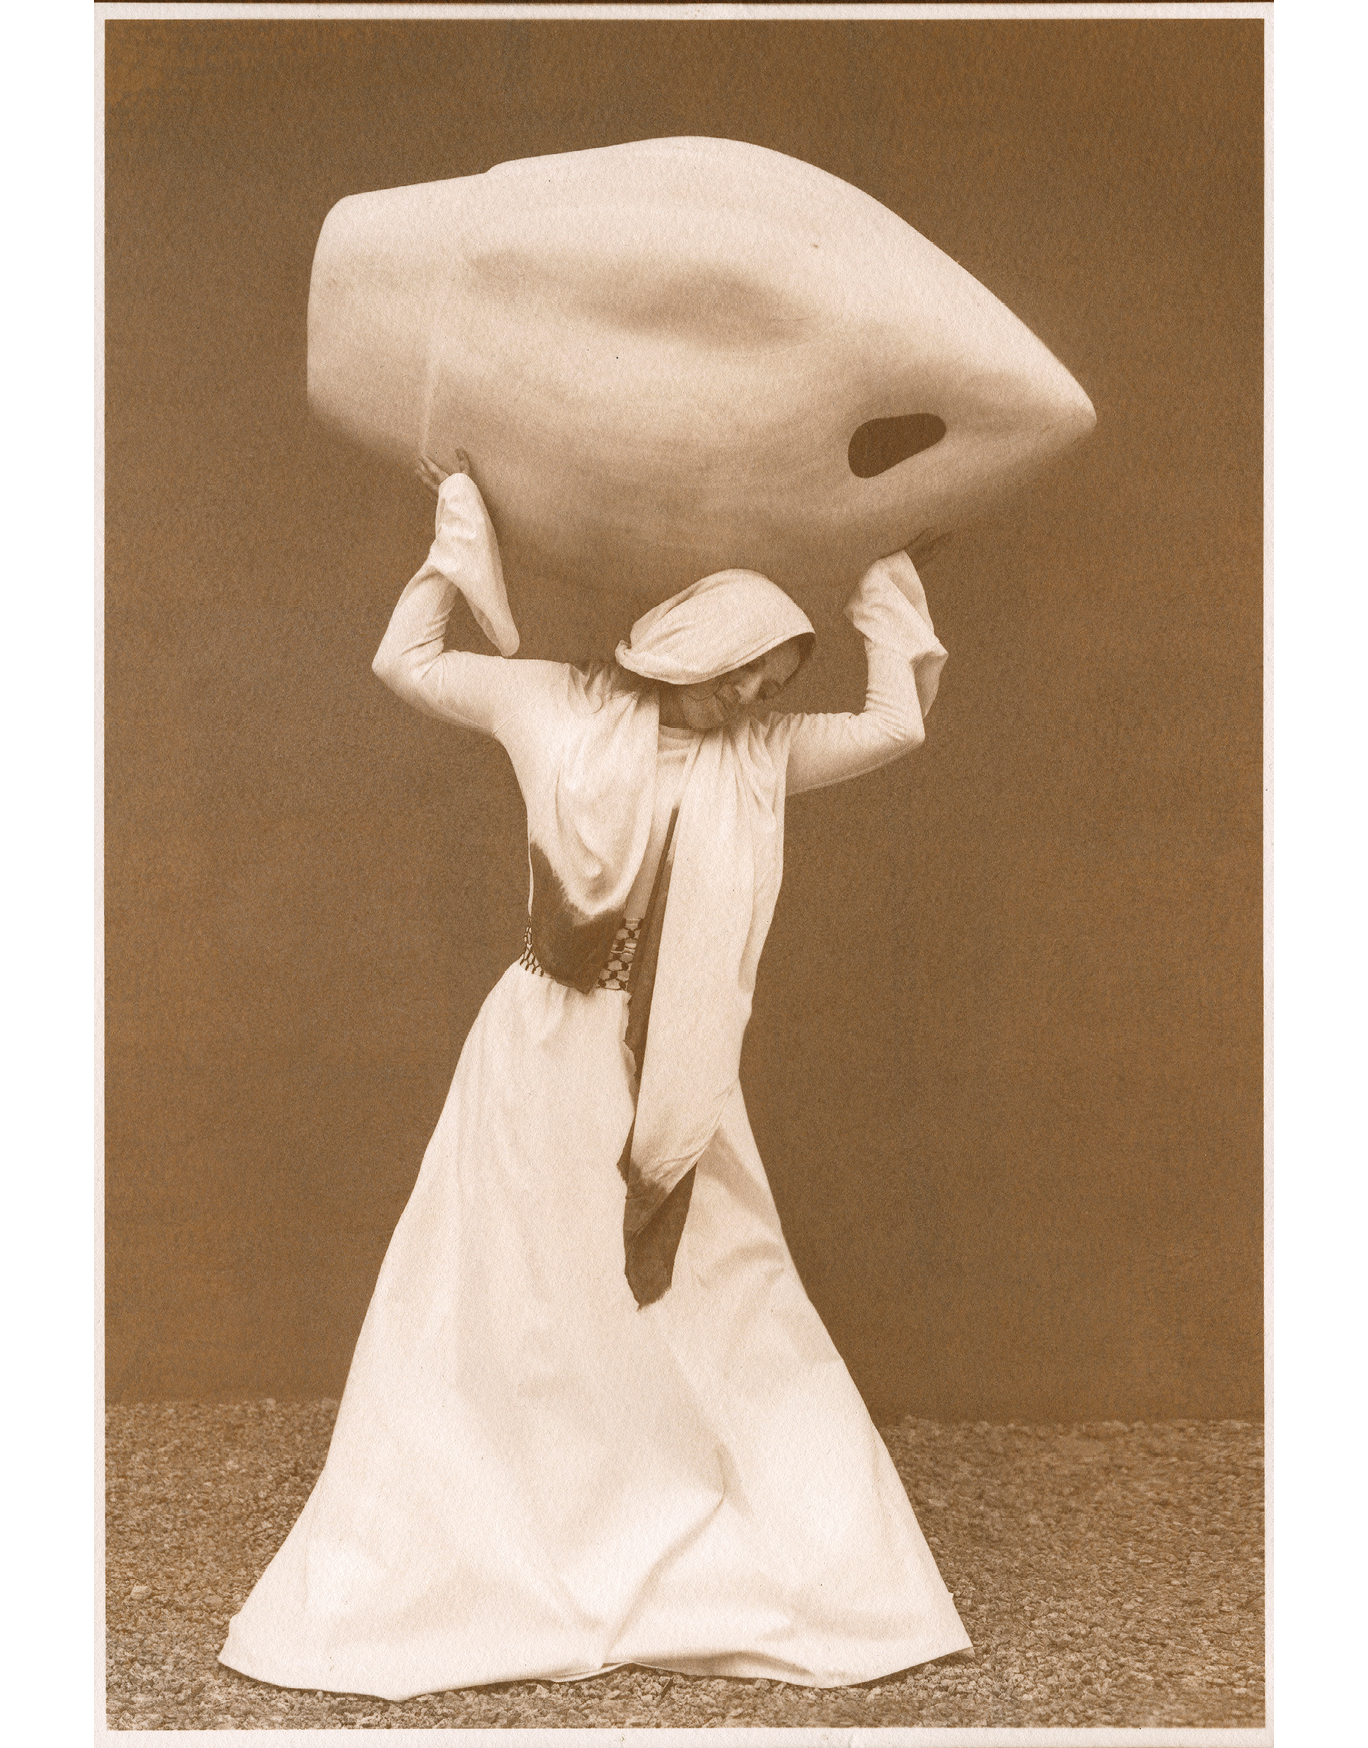 Brown toned photographic portrait of a woman in all white dress, carrying a very large wooden vase with a hole in it over her head.